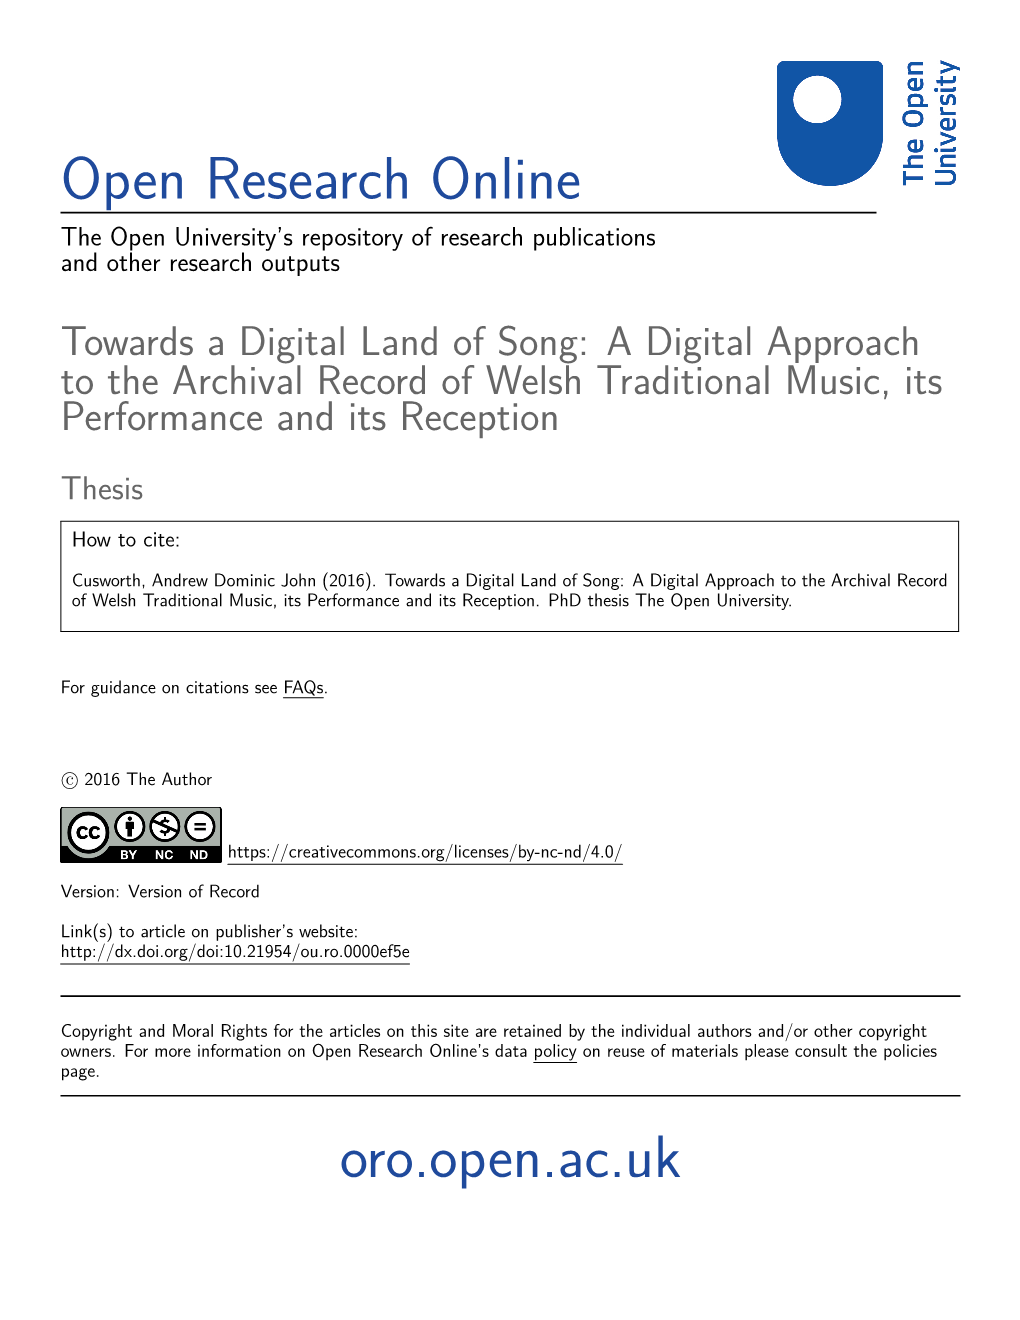 Towards a Digital Land of Song: a Digital Approach to the Archival Record of Welsh Traditional Music, Its Performance and Its Reception